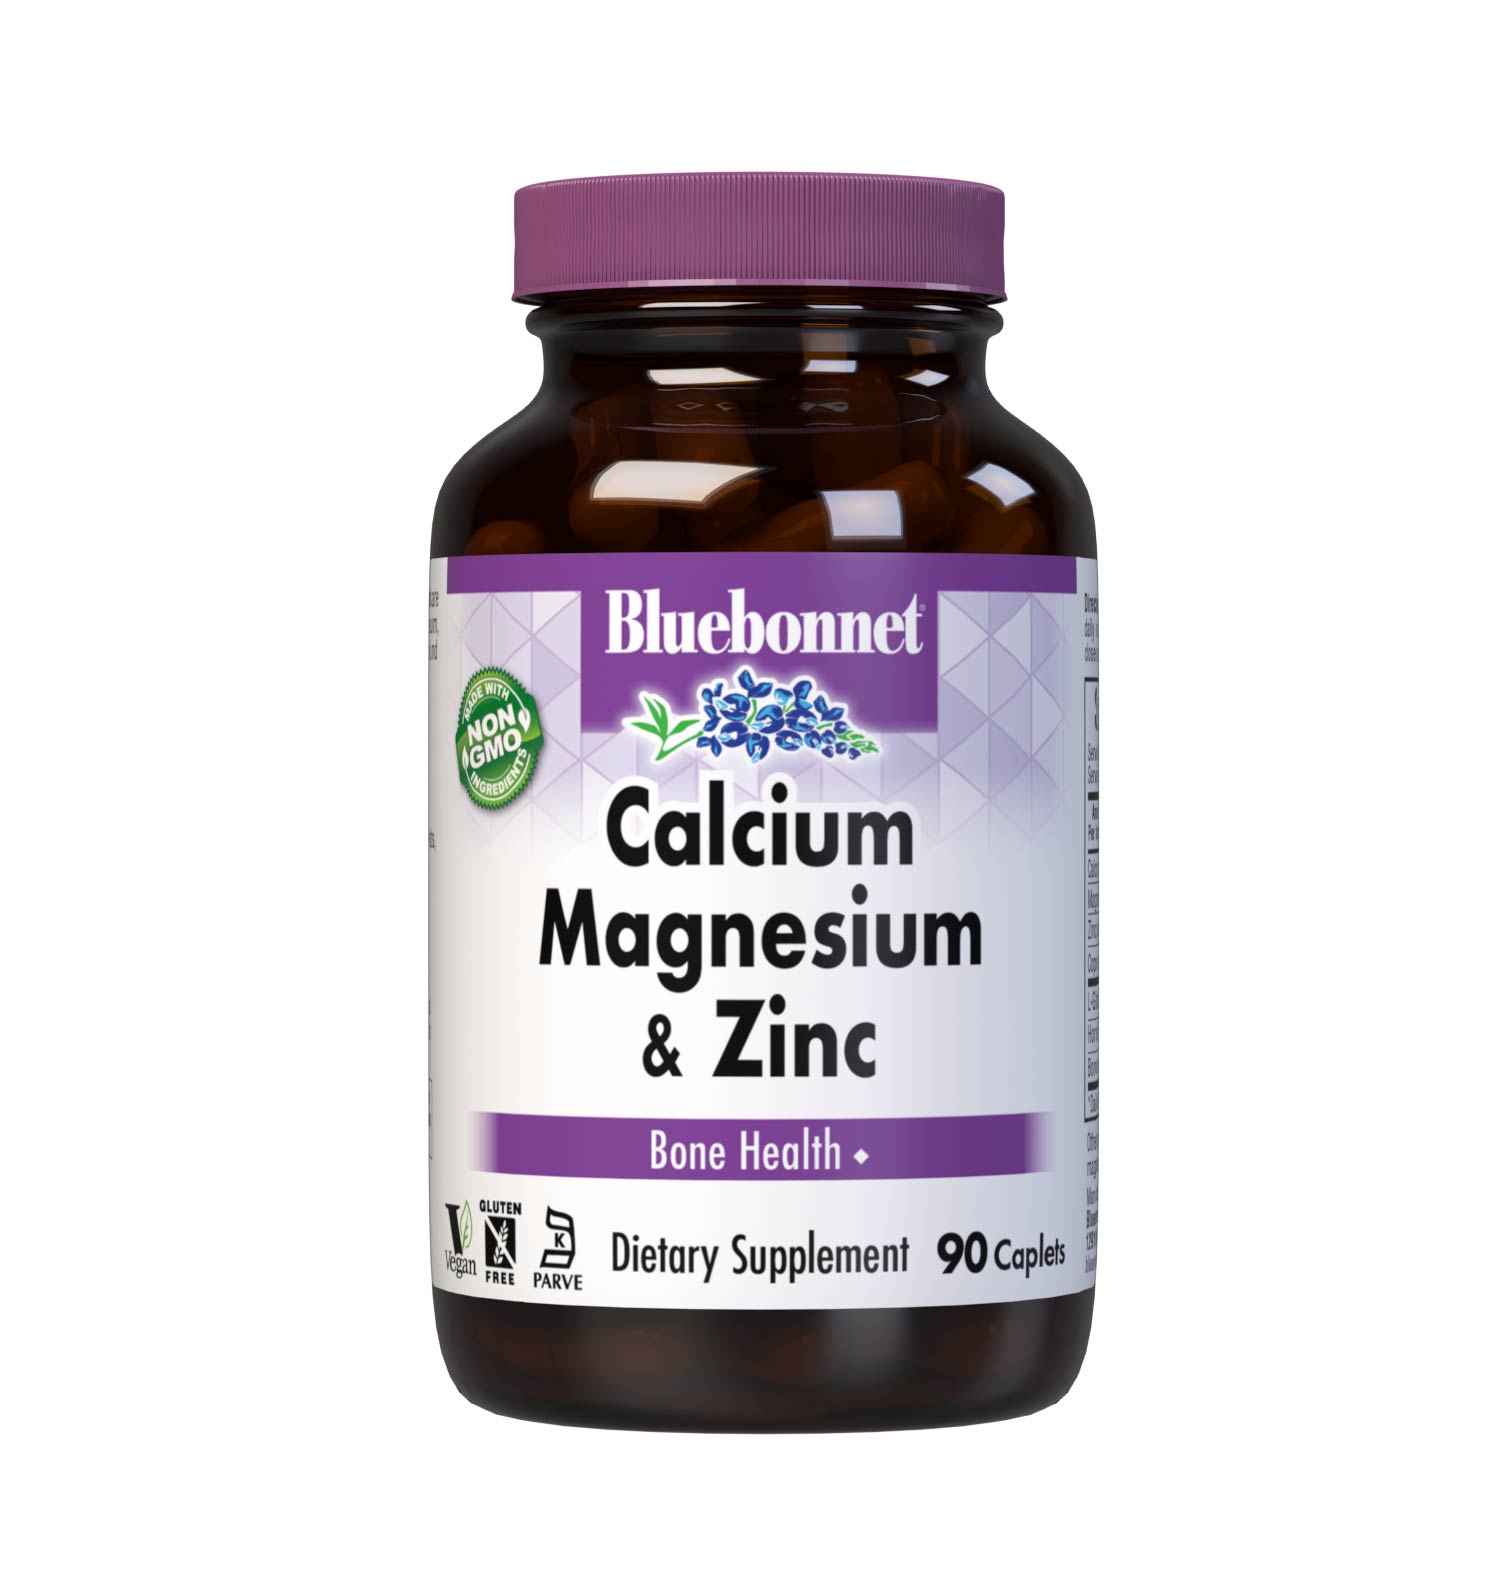 Bluebonnet's Calcium Magnesium & Zinc 90 Caplets are formulated with a combination of calcium, magnesium, zinc, copper and boron along with L-glutamic acid and horsetail powder for strong, healthy bones. #size_90 count